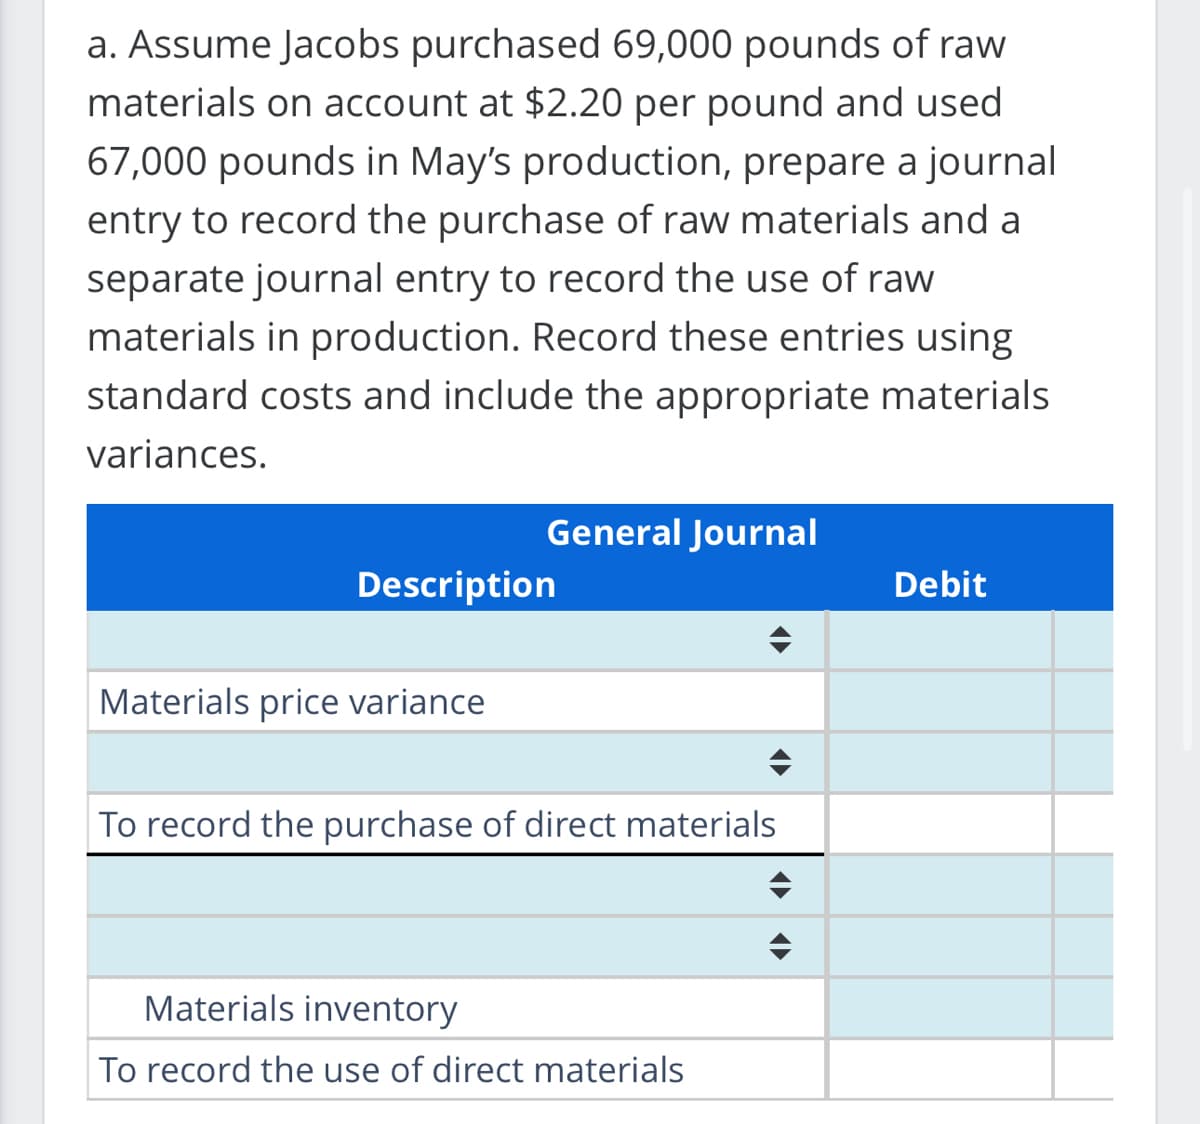 a. Assume Jacobs purchased 69,000 pounds of raw
materials on account at $2.20 per pound and used
67,000 pounds in May's production, prepare a journal
entry to record the purchase of raw materials and al
separate journal entry to record the use of raw
materials in production. Record these entries using
standard costs and include the appropriate materials
variances.
General Journal
Description
Materials price variance
To record the purchase of direct materials
Materials inventory
To record the use of direct materials
Debit